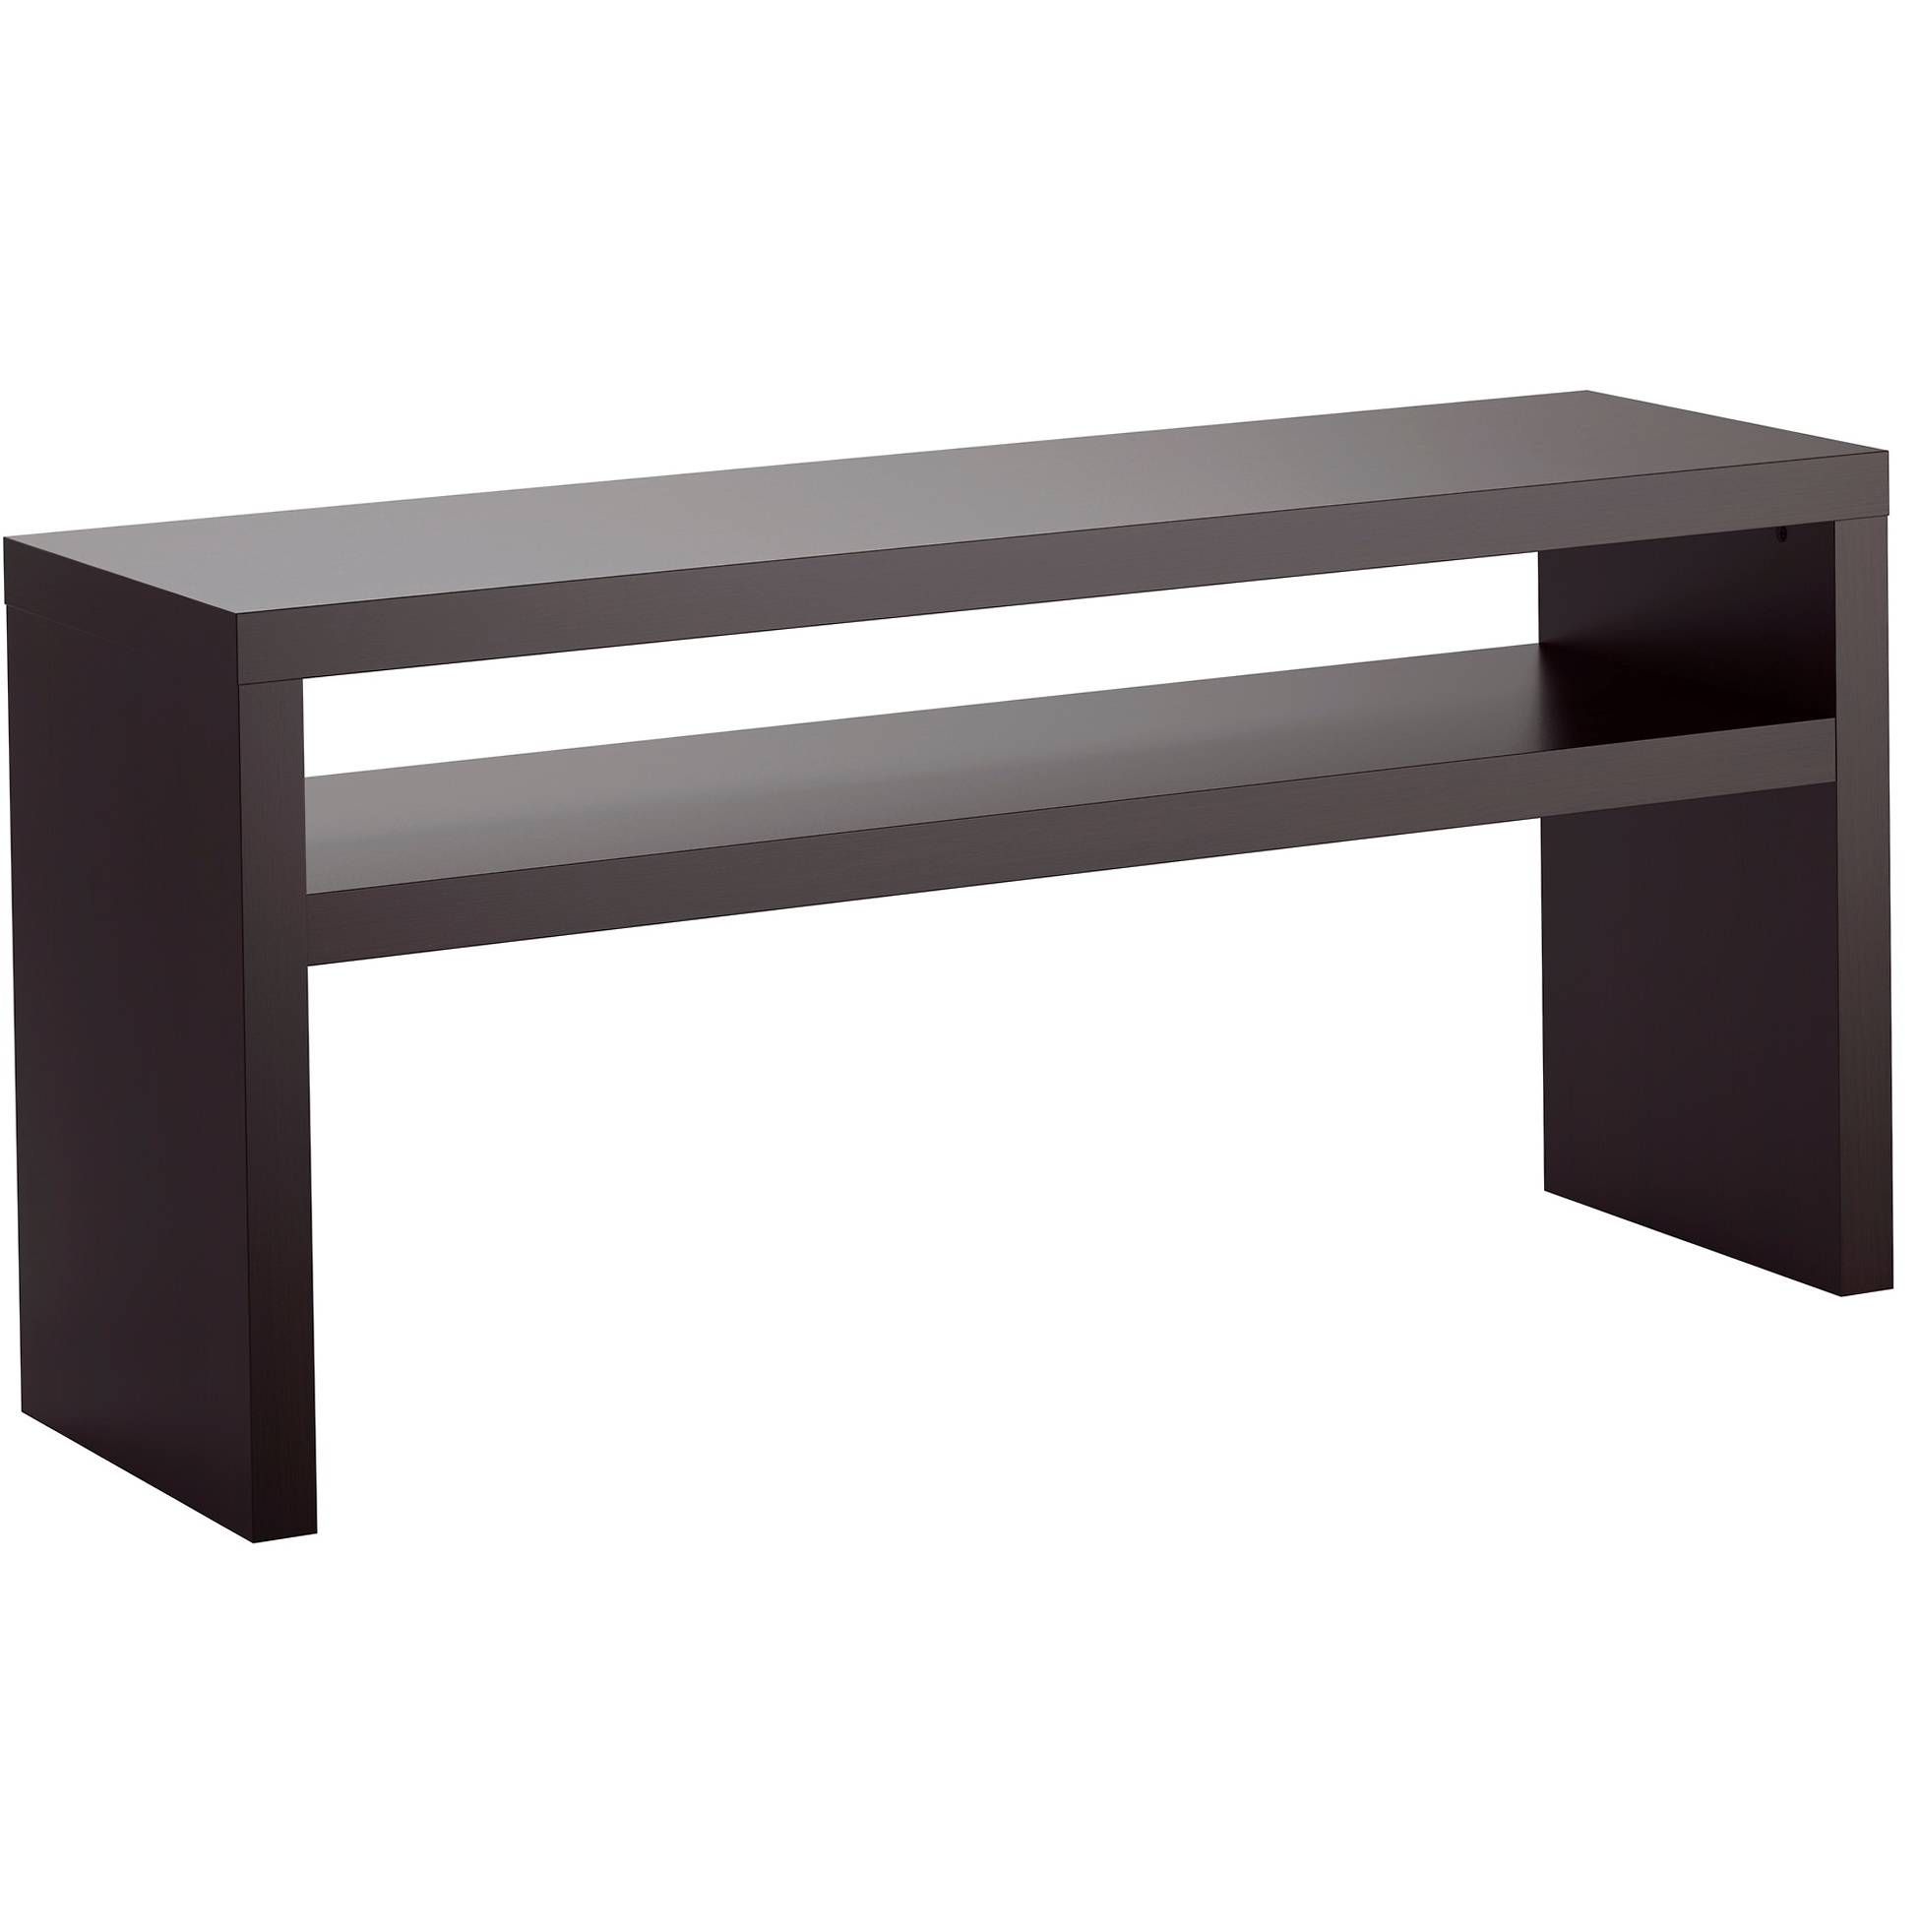 Furniture: Appealing Console Tables Ikea For Home Furniture Ideas With Thin Sideboard Table (View 8 of 20)